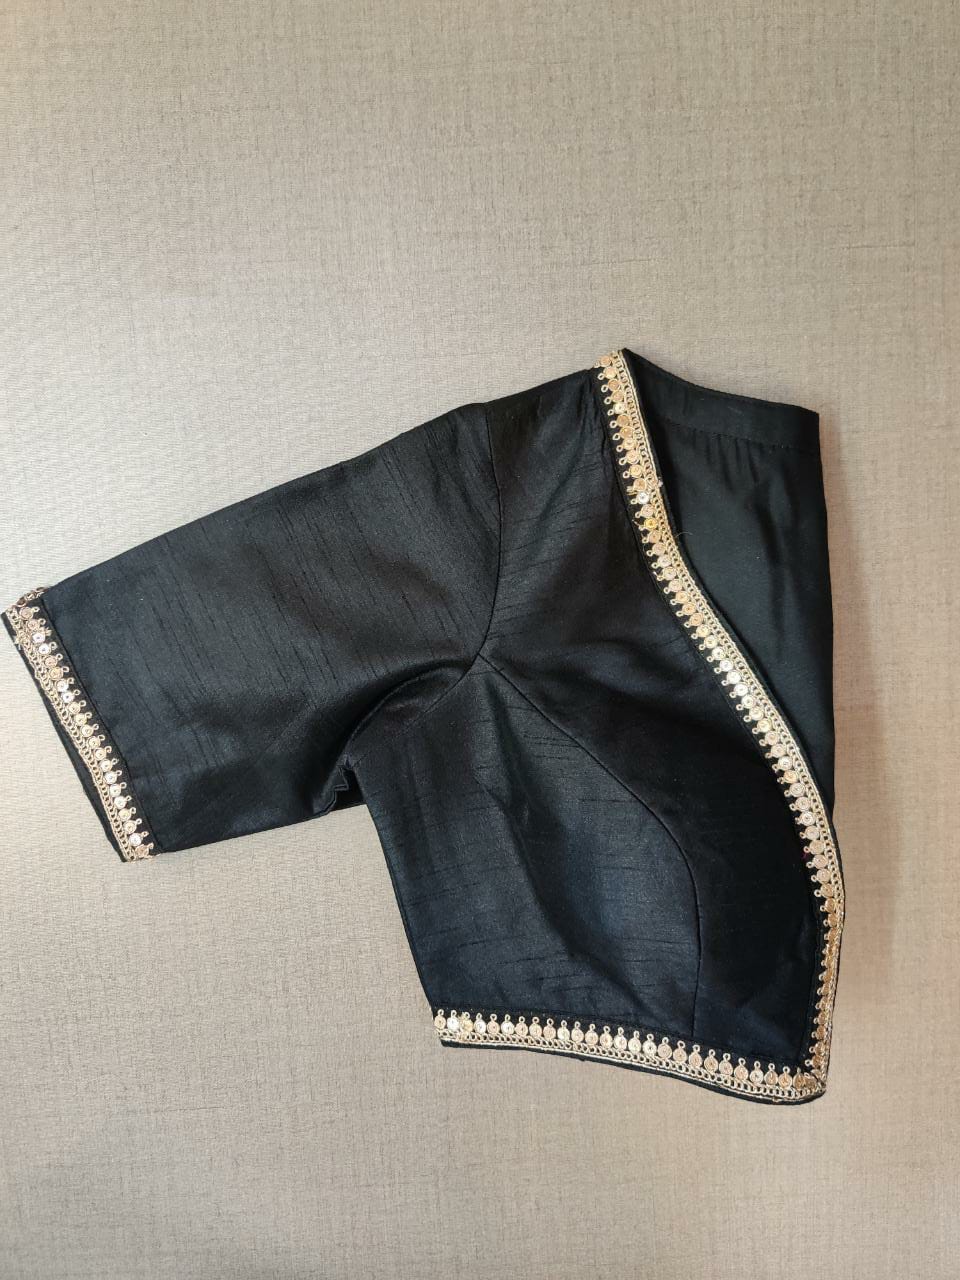 Buy gorgeous black readymade sari blouse online in USA with sequin work. Elevate your Indian ethnic saree looks with beautiful readymade saree blouse, embroidered saree blouses, Banarasi saree blouse, designer saree blouses from Pure Elegance Indian fashion store in USA.-sleeves